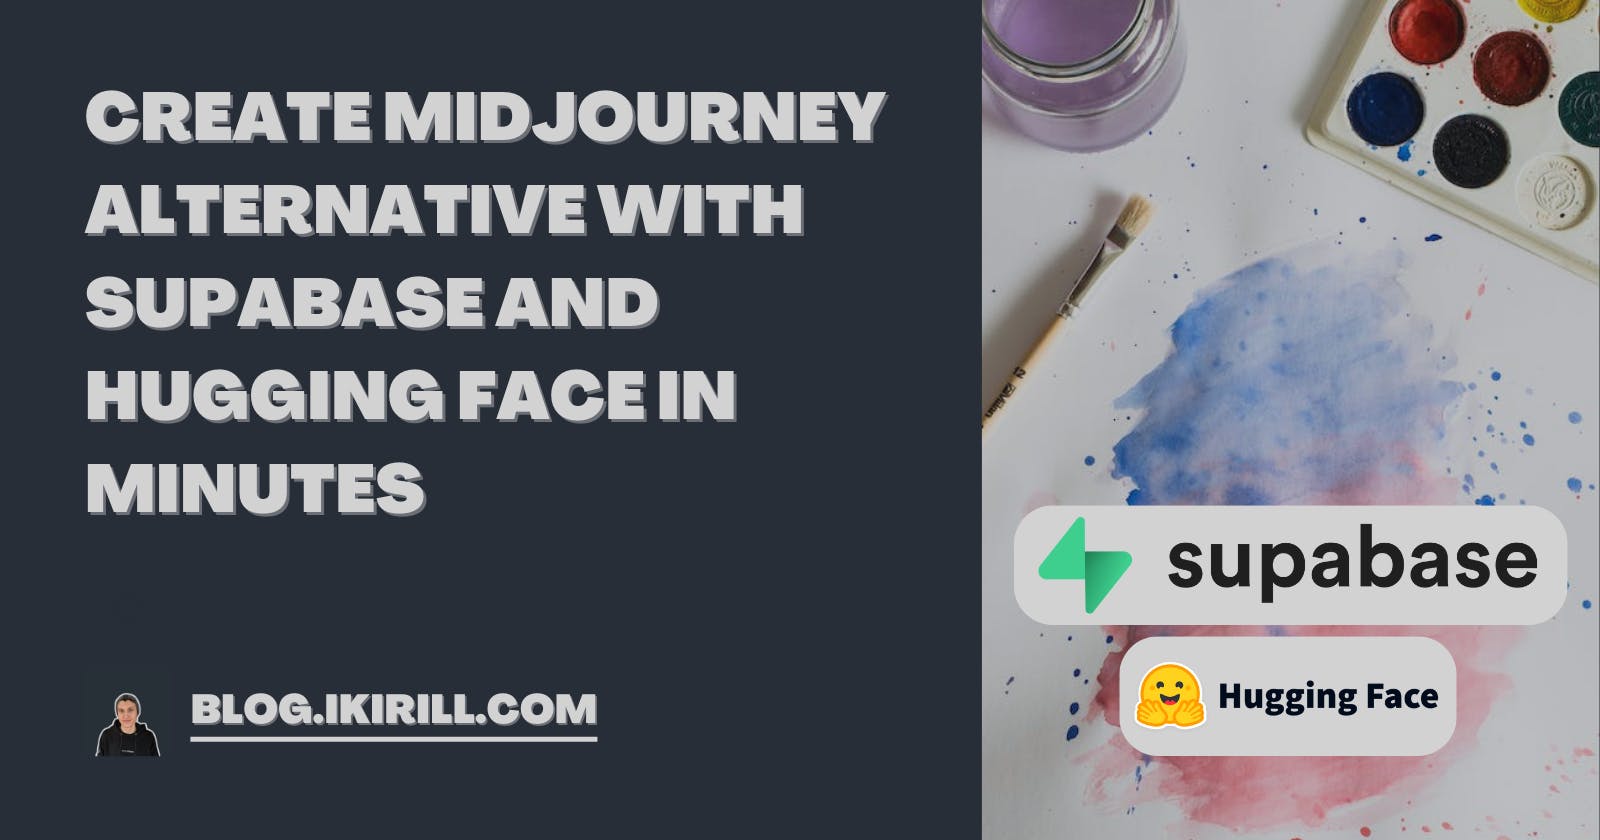 Create Midjourney Alternative with Supabase and Hugging Face